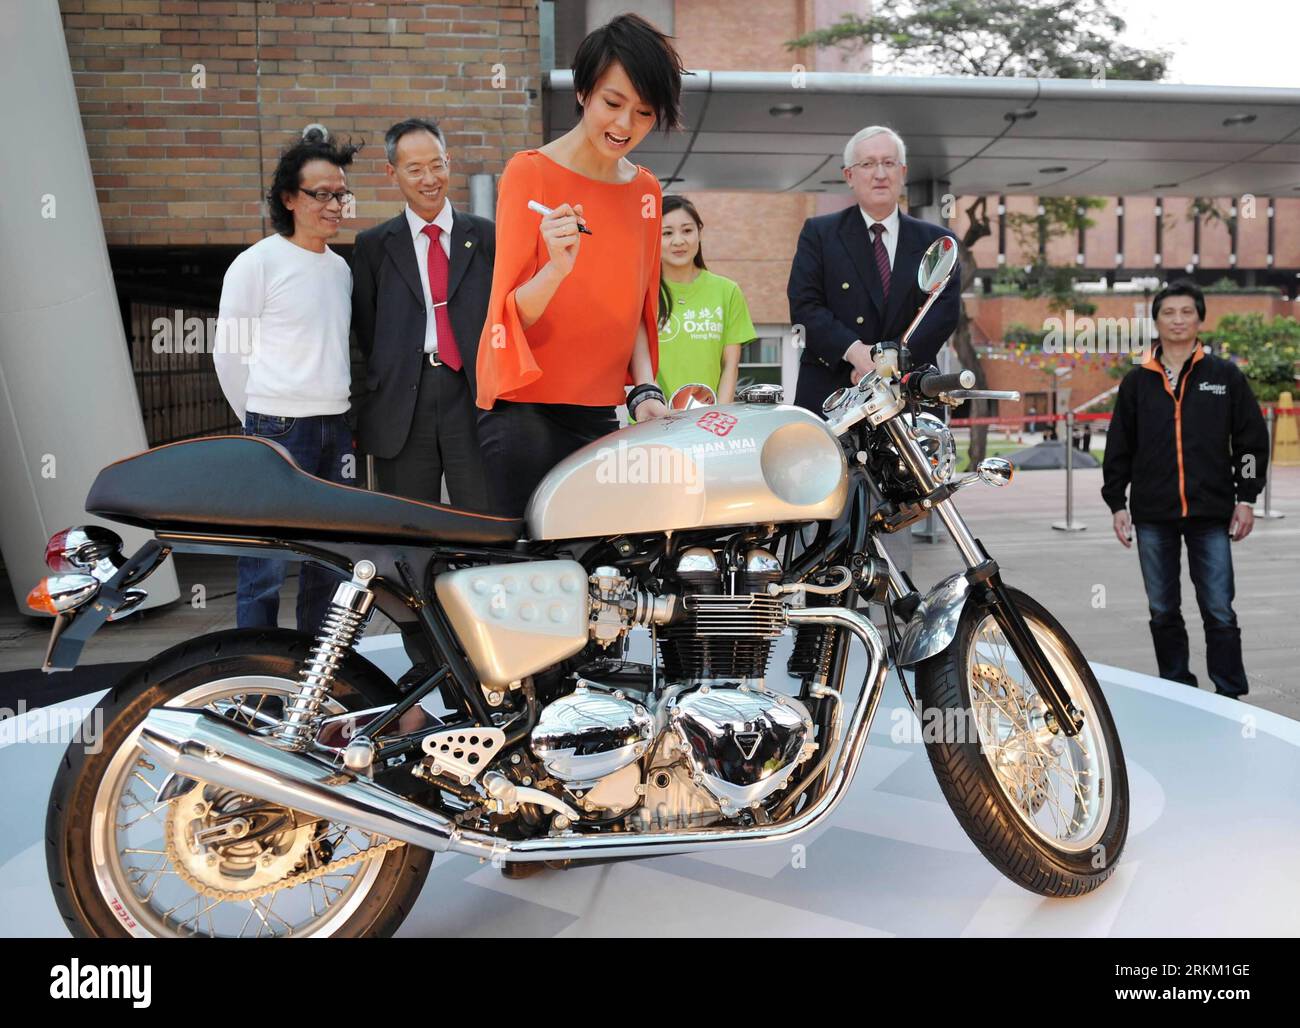 Bildnummer: 56365698  Datum: 21.11.2011  Copyright: imago/Xinhua (111121) -- HONG KONG, Nov. 21, 2011 (Xinhua) -- Singer Gigi Leung (front) signs on an auctioned motorcycle during the press conference of a charity auction ceremony in Hong Kong, south China, Nov. 21, 2011. The motorcycle is donated to support Hong Kong Polytechnic University s teaching and training activities. (Xinhua/Song Zhenping) CHINA-HONG KONG-GIGI LEUNG-CHARITY AUCTION (CN) PUBLICATIONxNOTxINxCHN People Entertainment Musik xda x0x 2011 quer      56365698 Date 21 11 2011 Copyright Imago XINHUA  Hong Kong Nov 21 2011 XINHUA Stock Photo